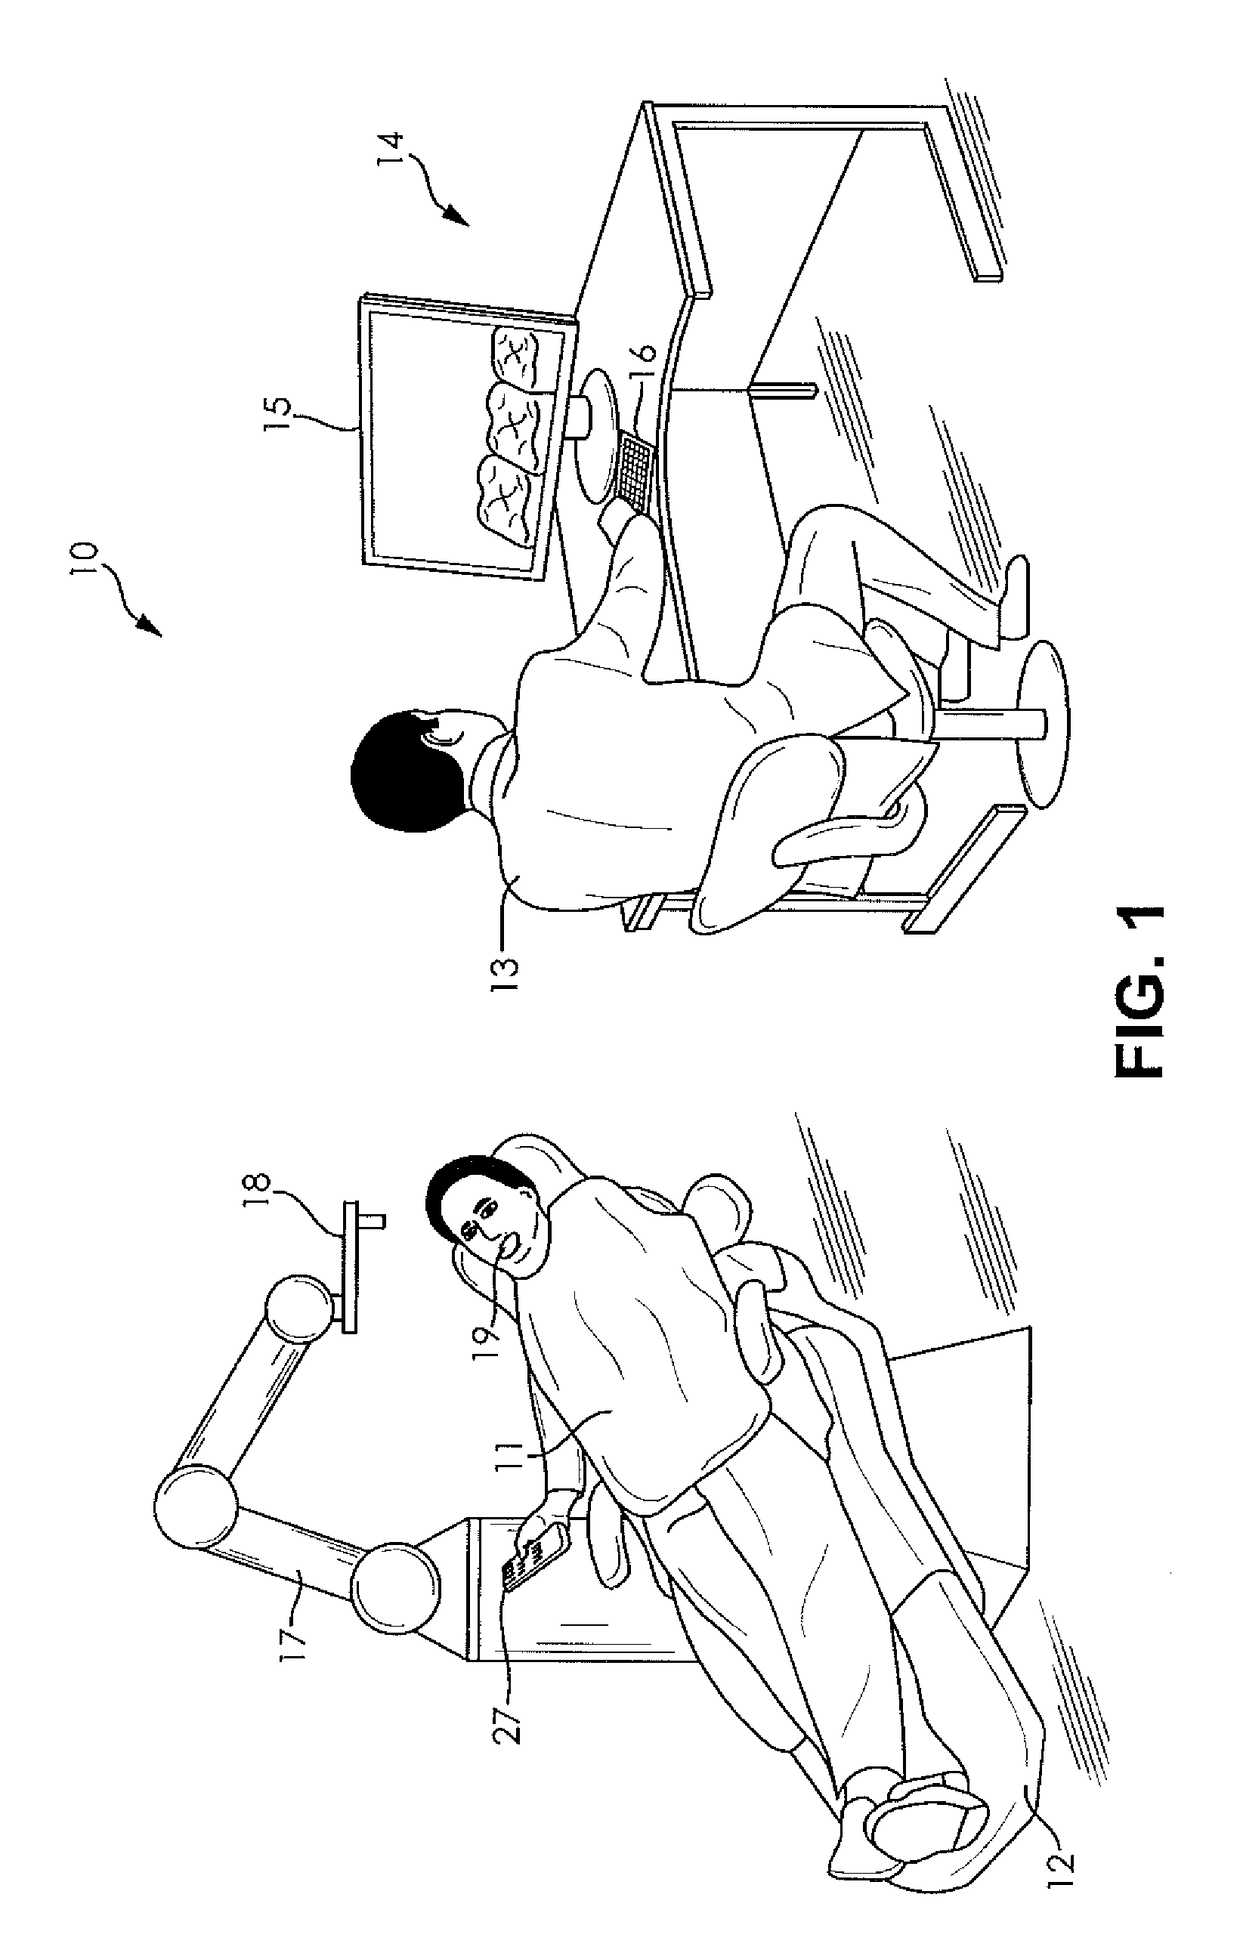 System and method for automating medical procedures